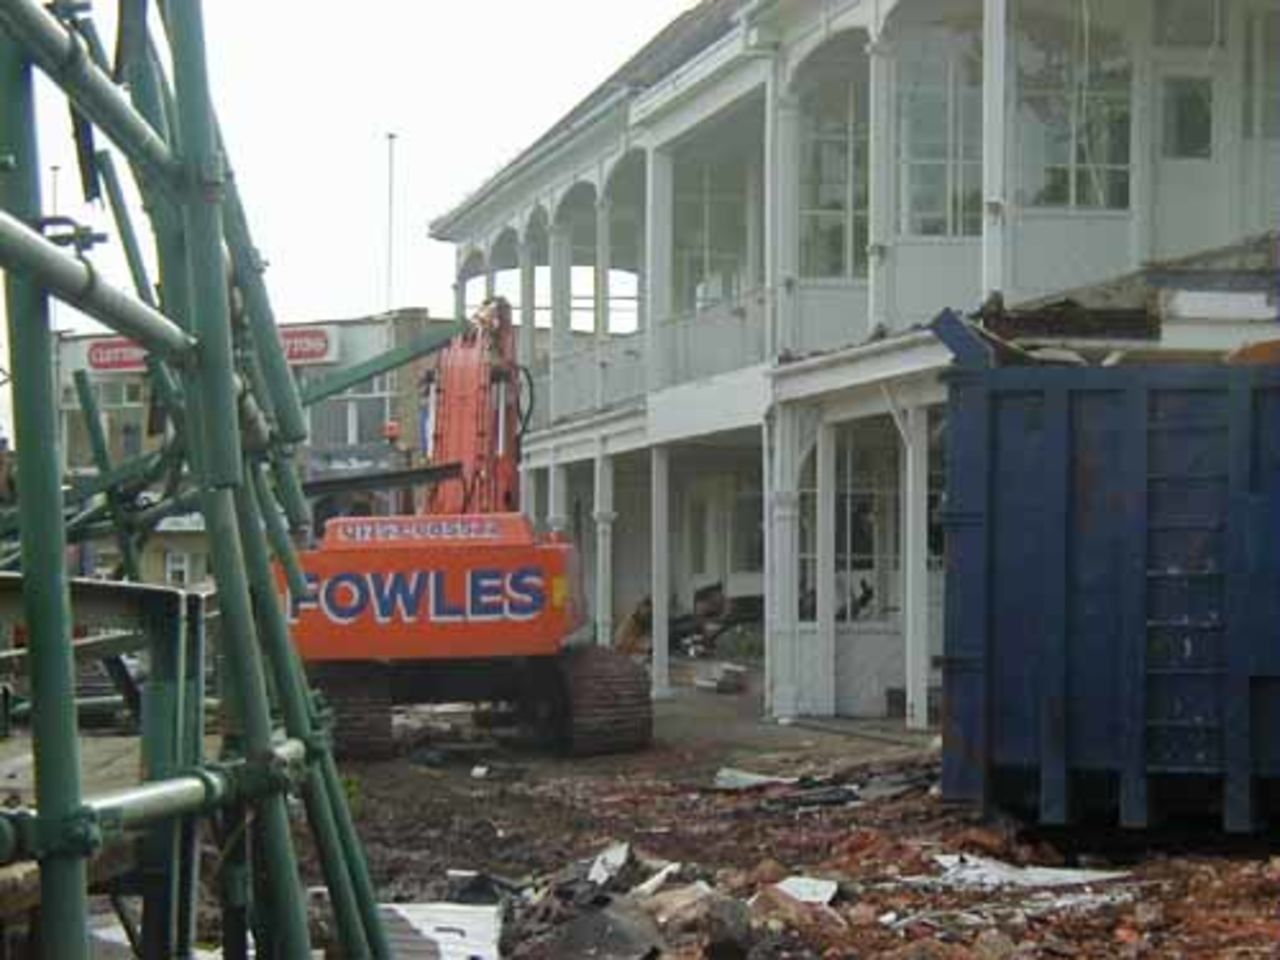 Demolition continues as the 115 year old pavilion is turned to rubble